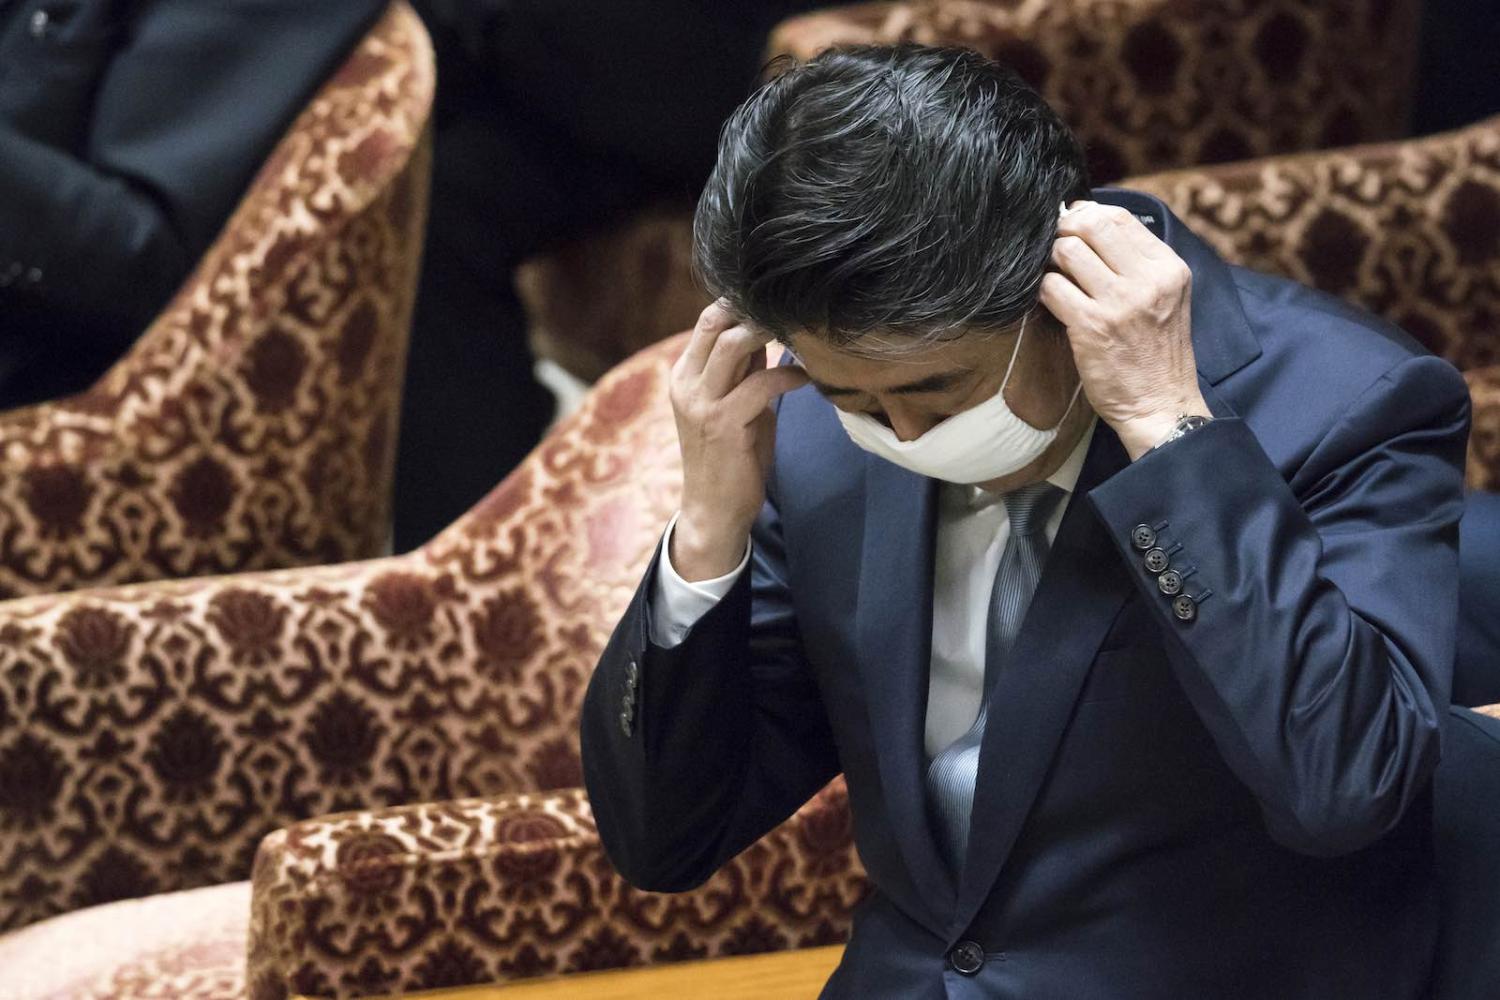 Japan's Prime Minister Abe Shinzo during a budget committee meeting at the lower house of parliament on 28 April (Tomohiro Ohsumi/Getty Images)